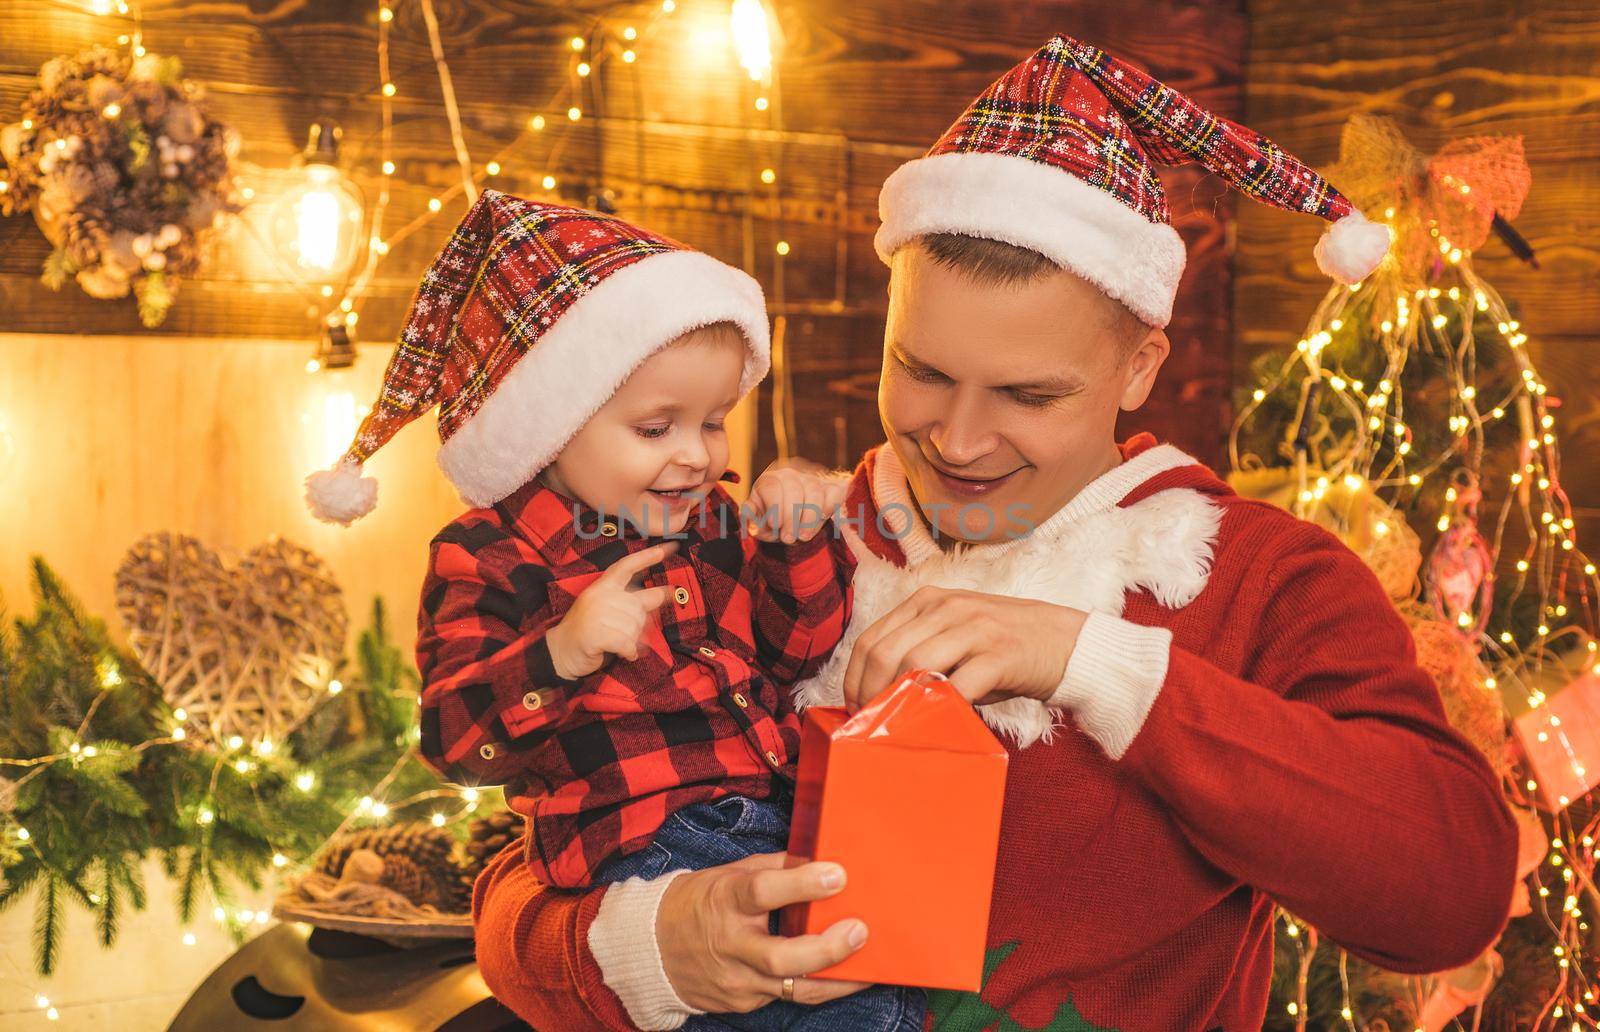 Smiling father and his son in Santa's hat open a Christmas gift present box. New Year tree and fire place at background. Christmas time. Childhood memories. Christmas child dreams